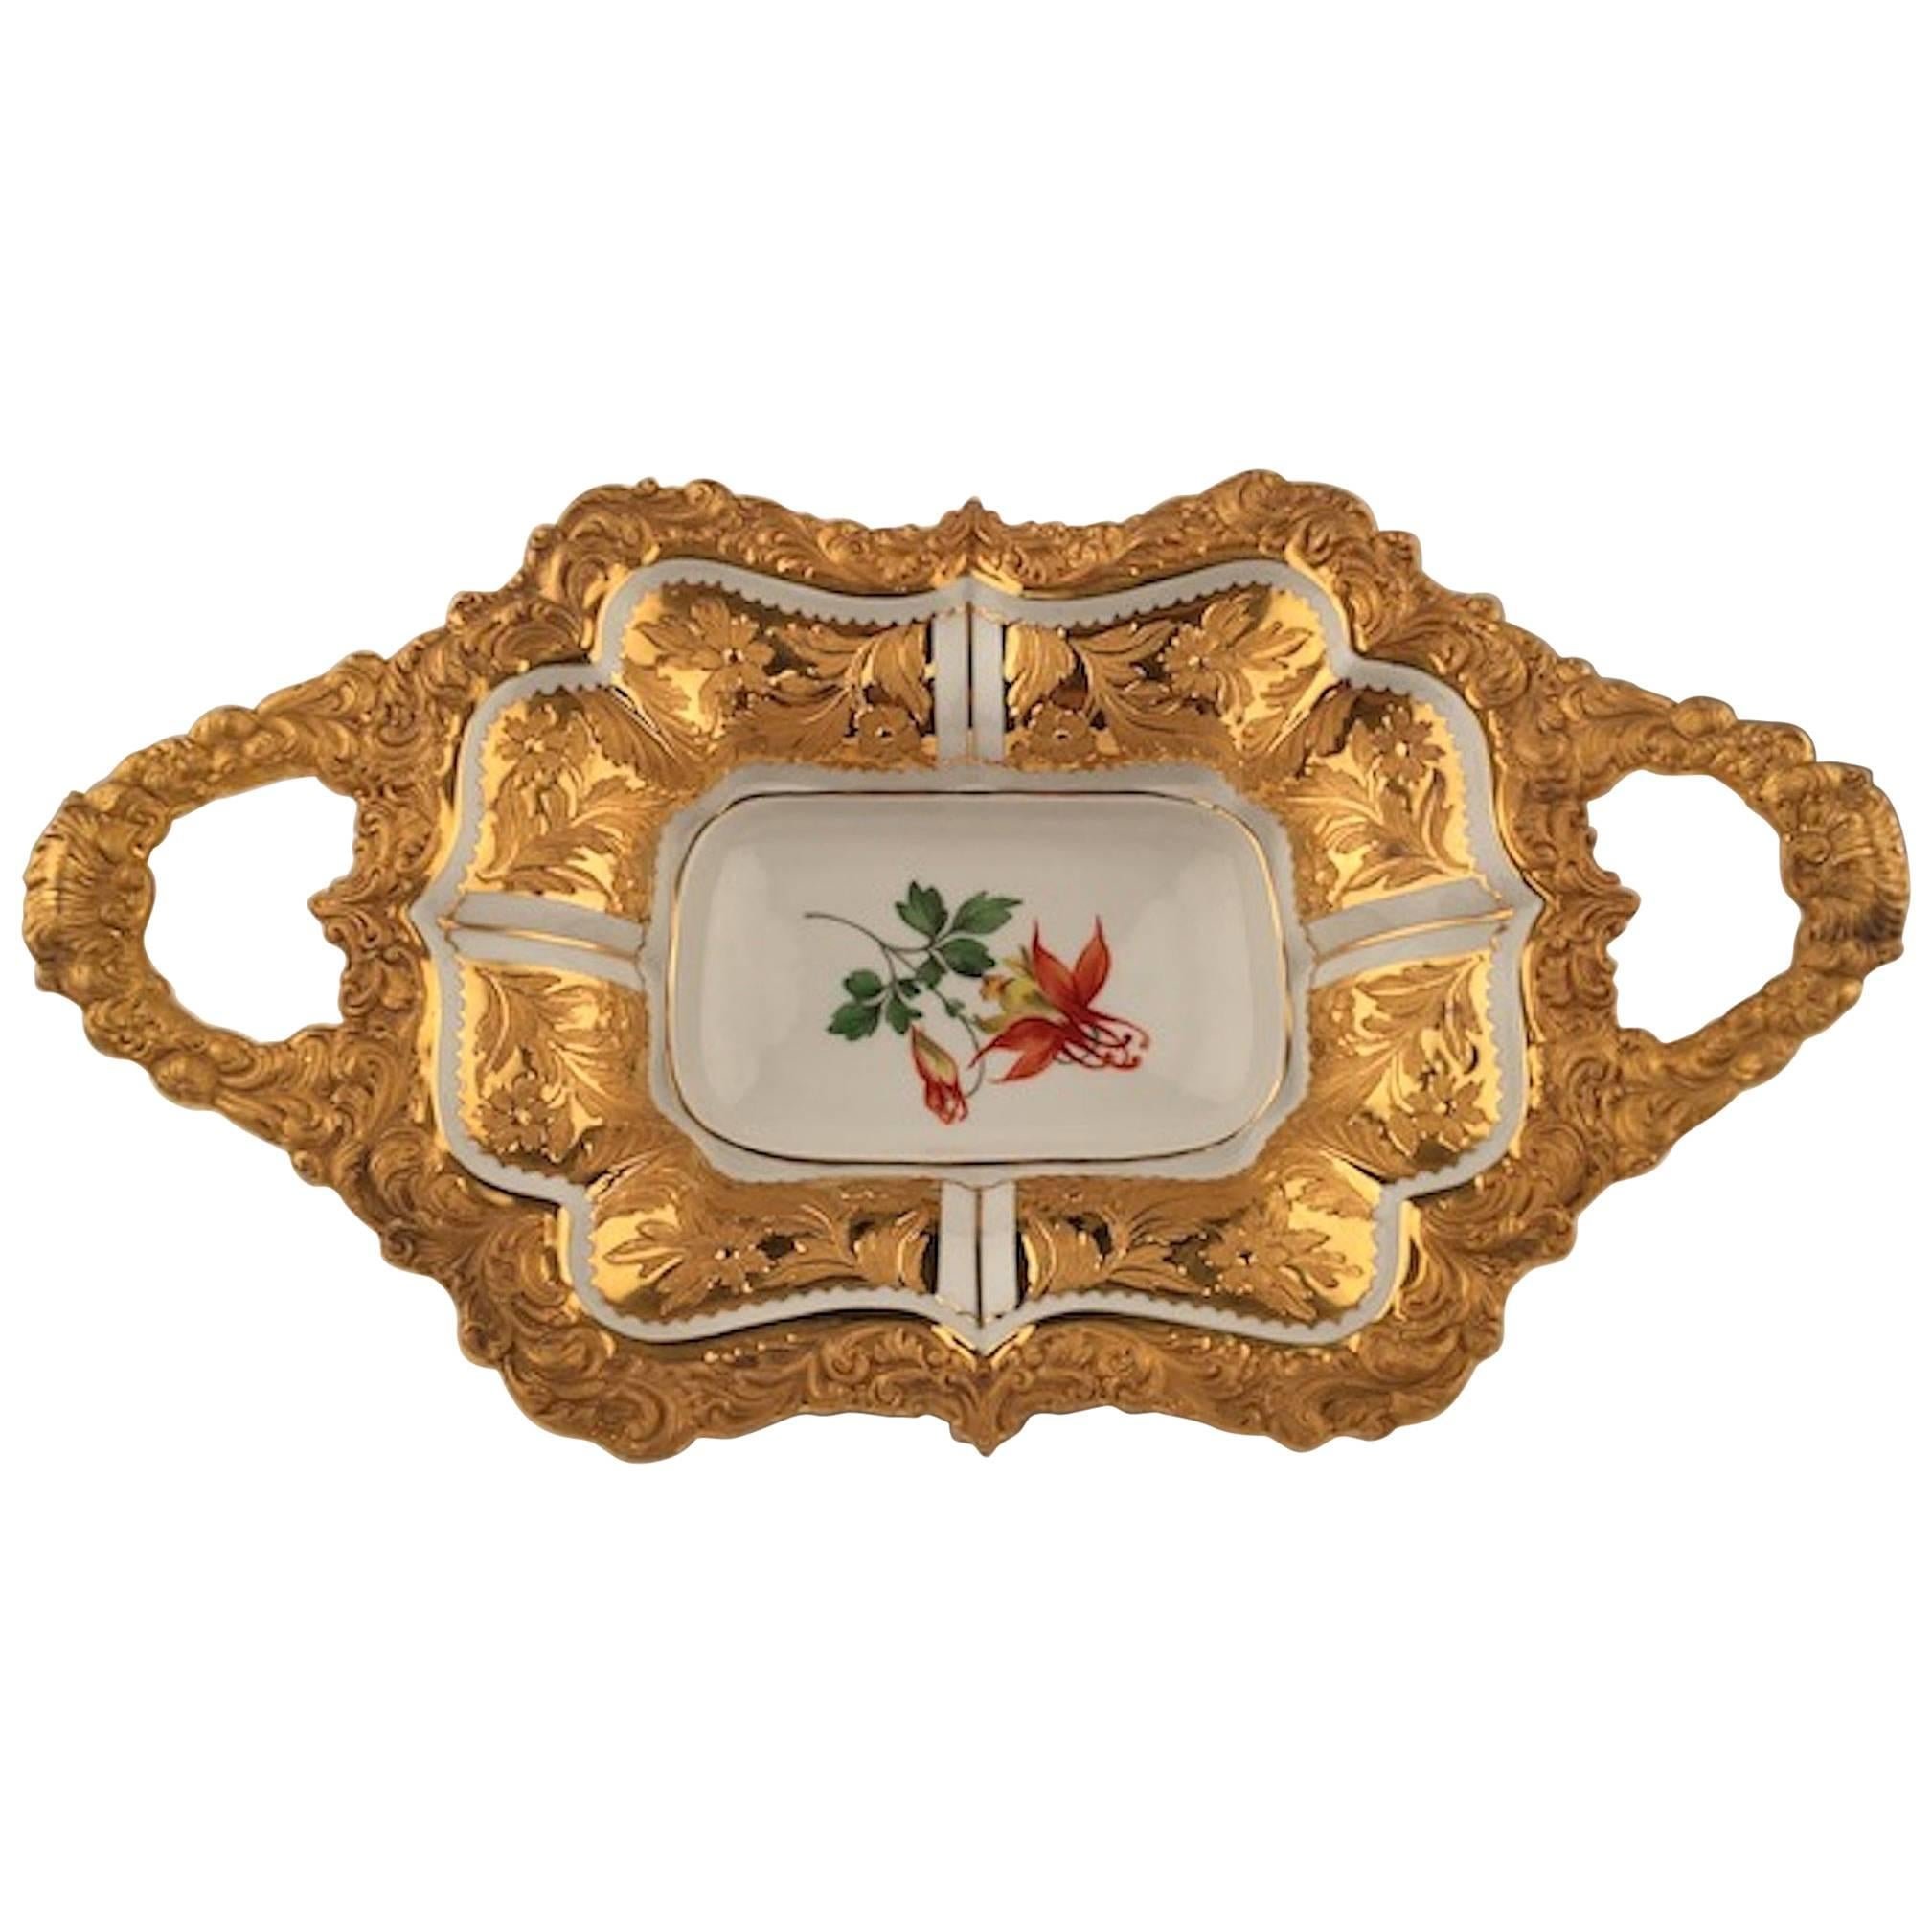 20th Century Meissen Two Handle Serving Tray with Gold Gilt Handles and Boarder